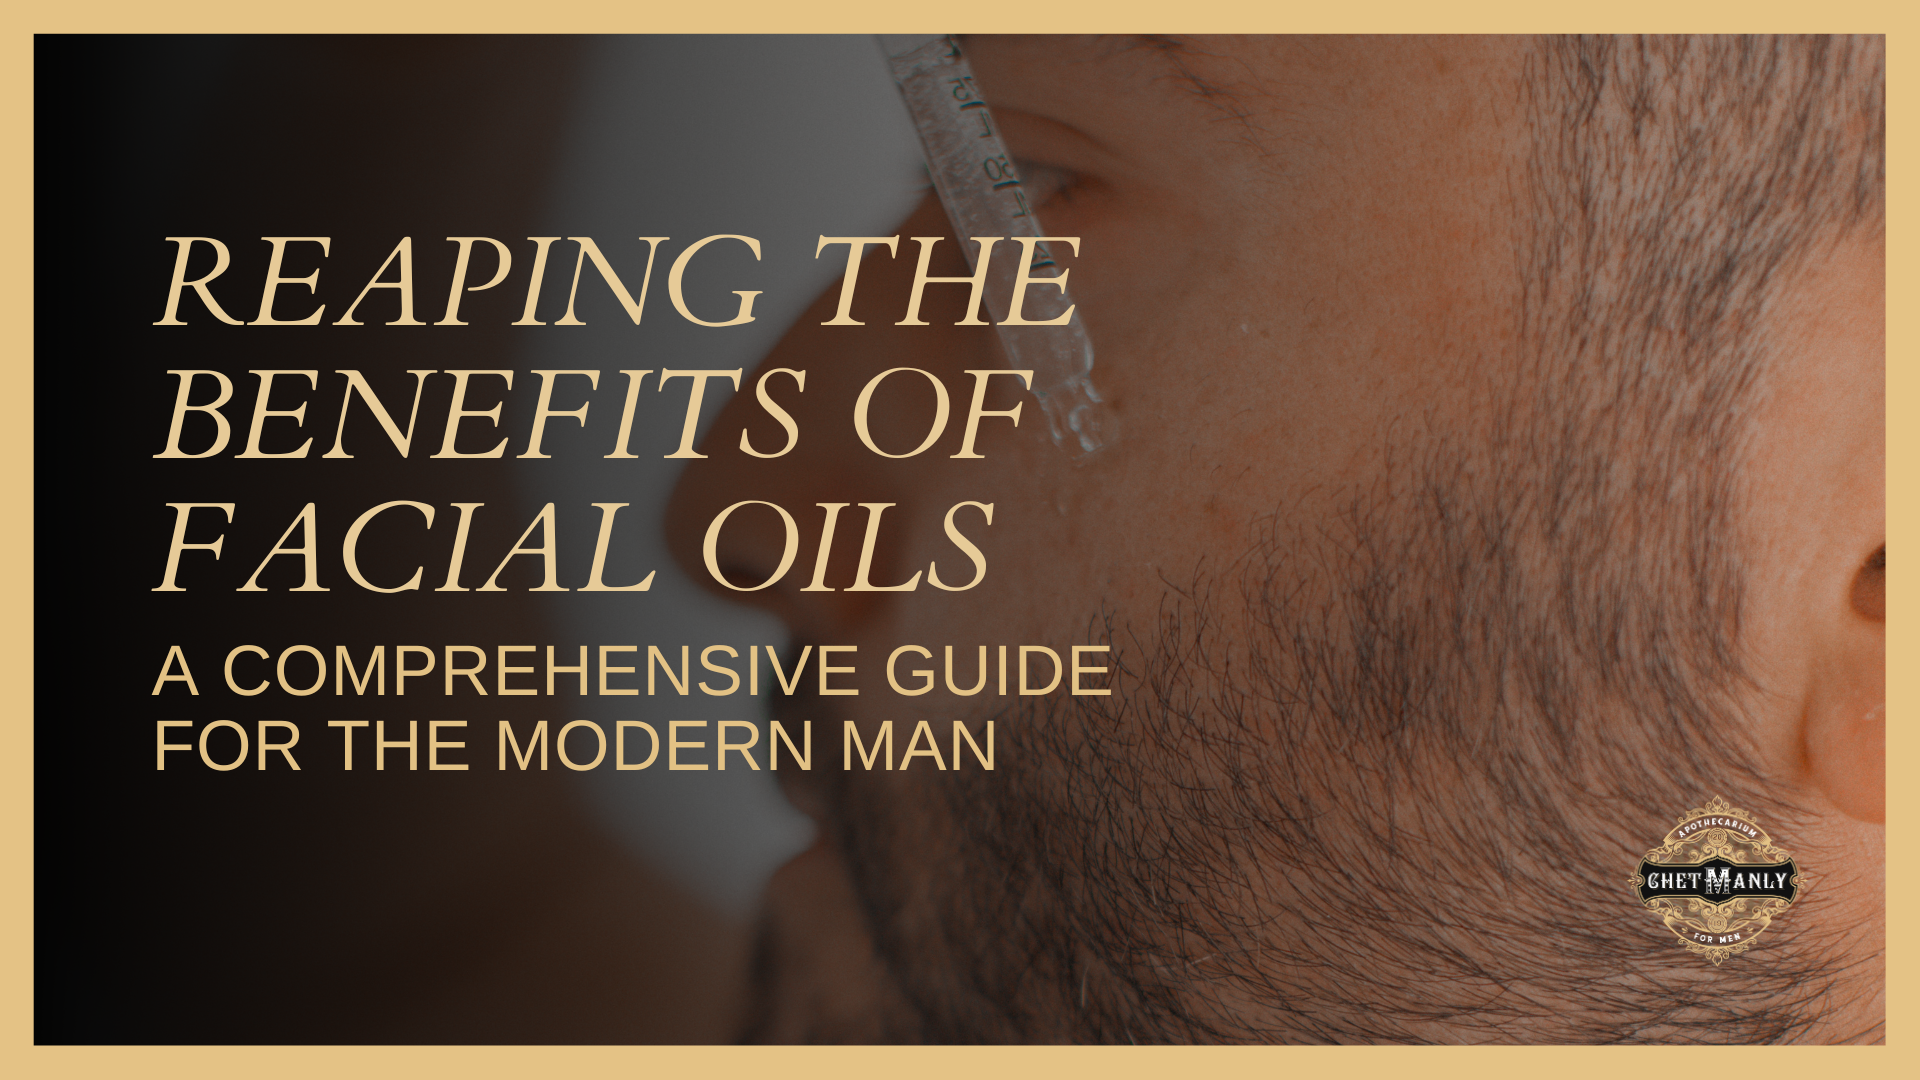 Reaping the Benefits of Facial Oils: A Comprehensive Guide for the Modern Man